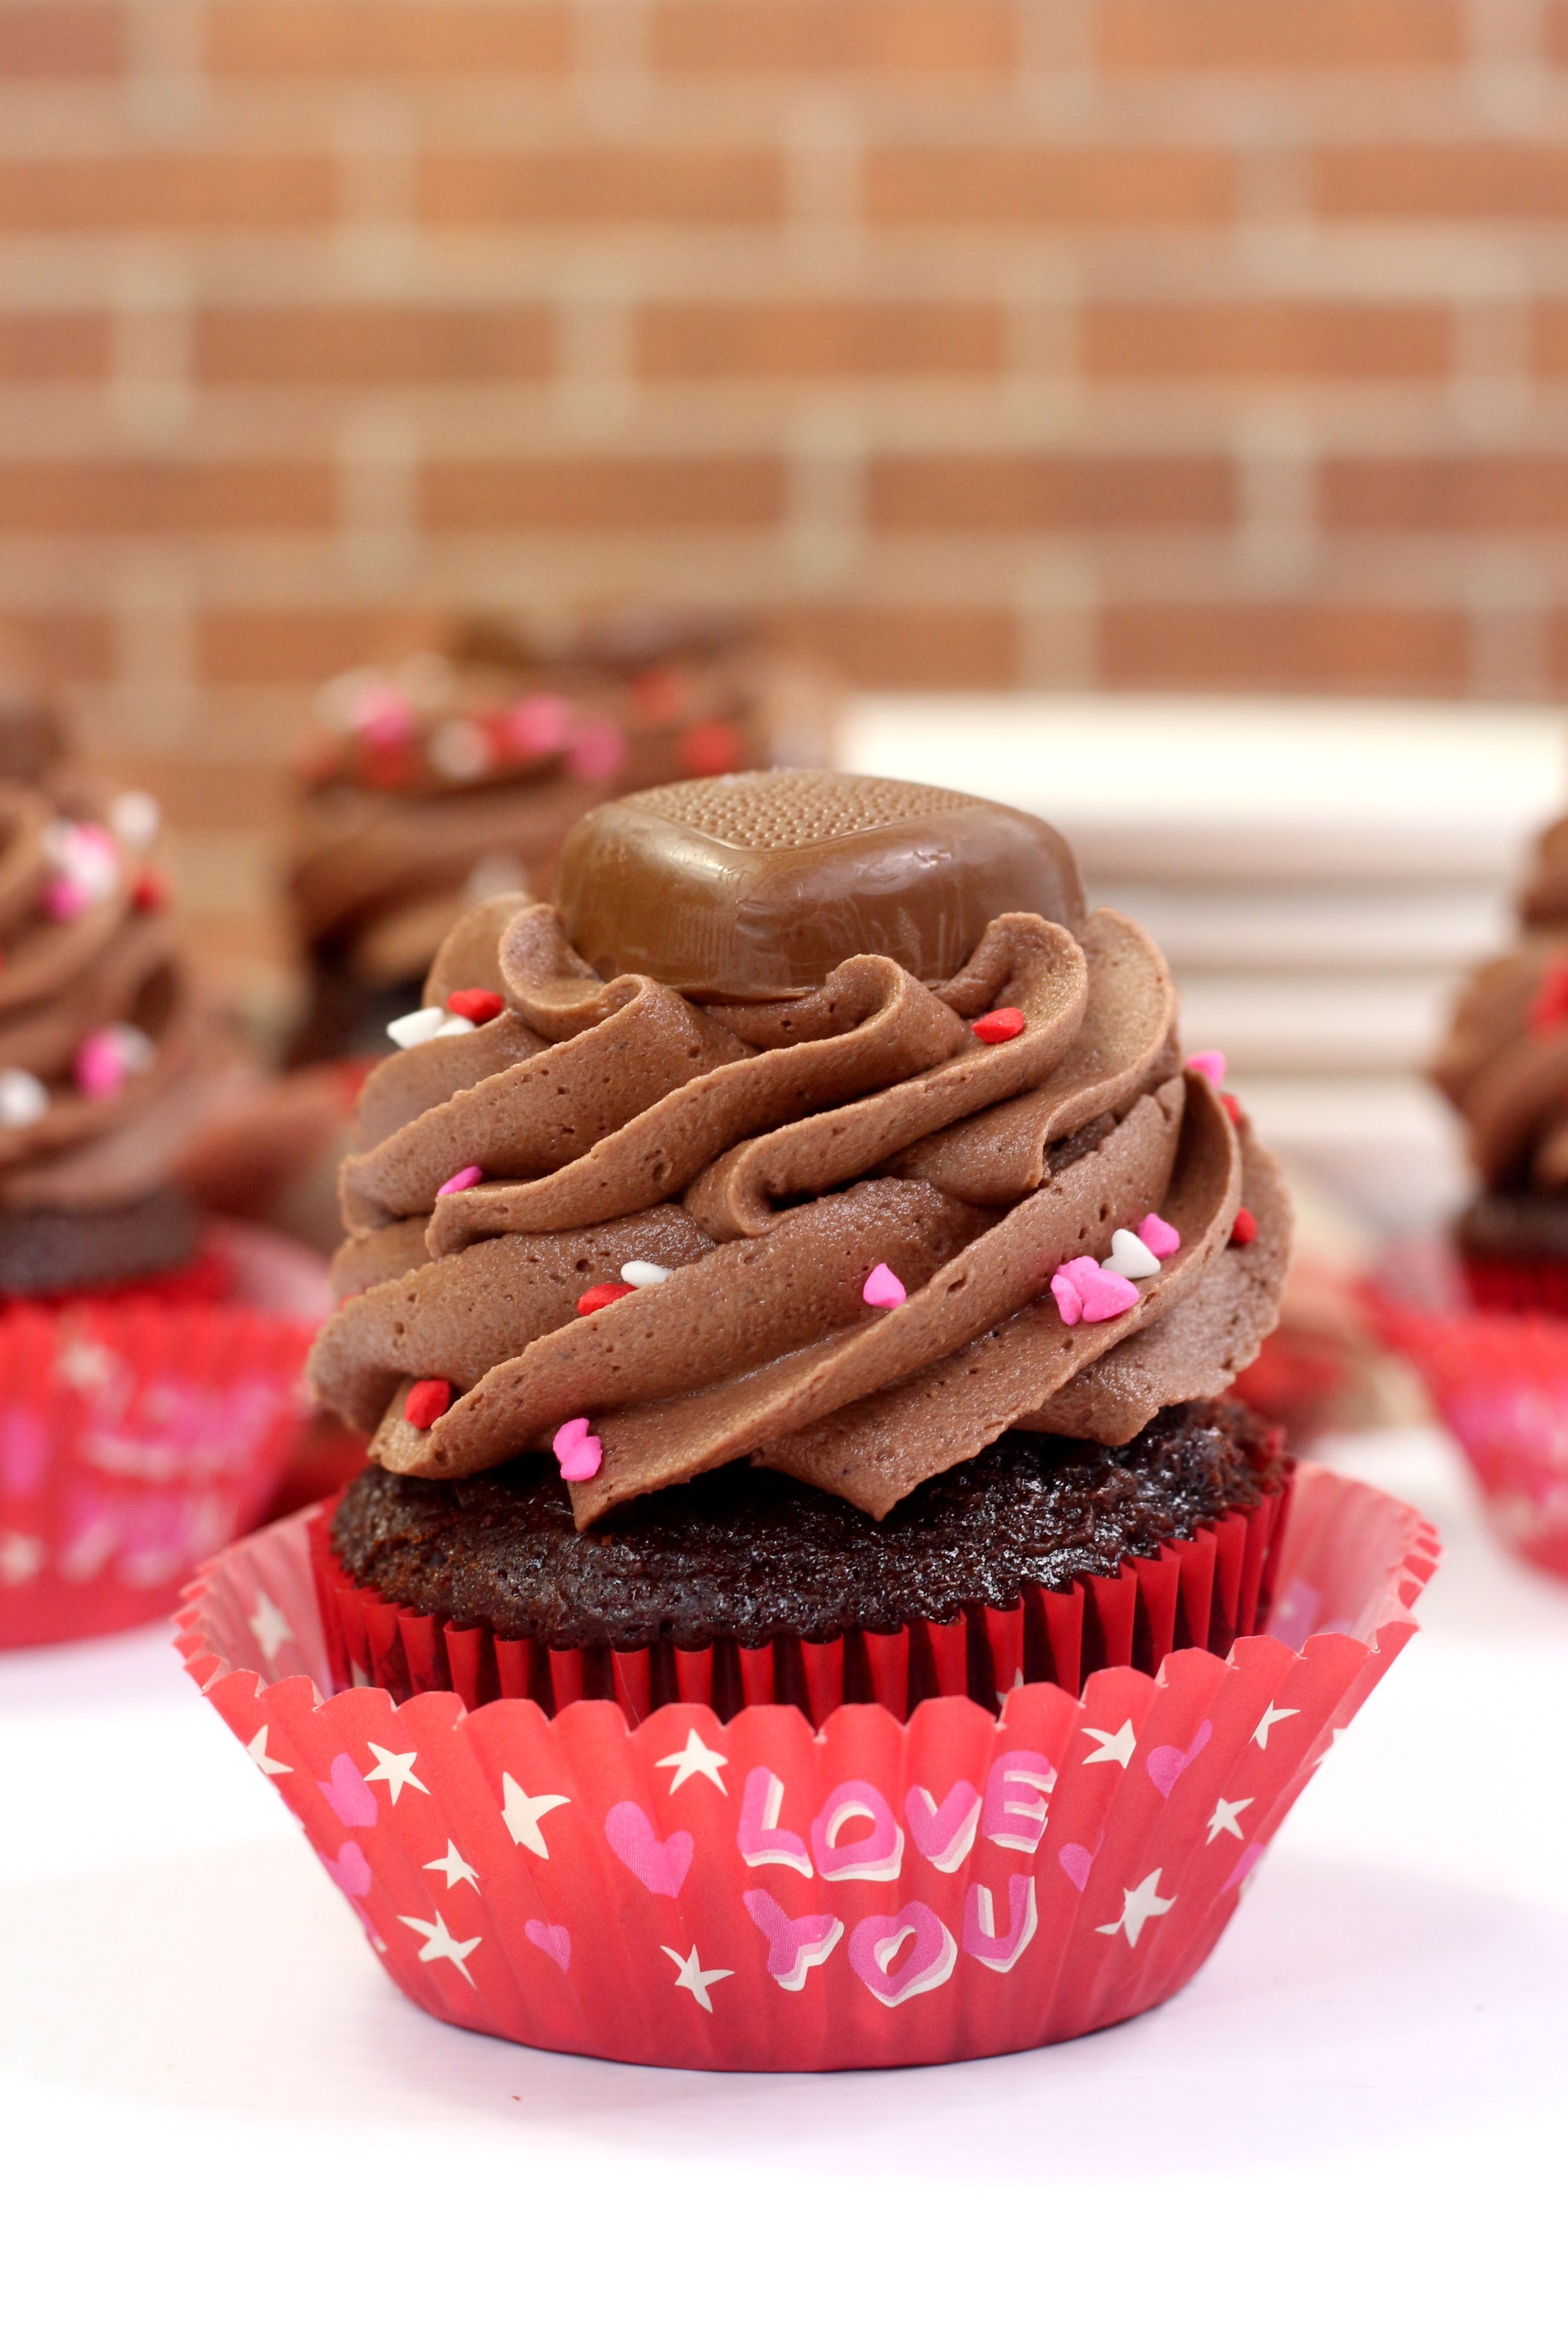 Pretty chocolate cupcake with heart sprinkles for Valentines Day.